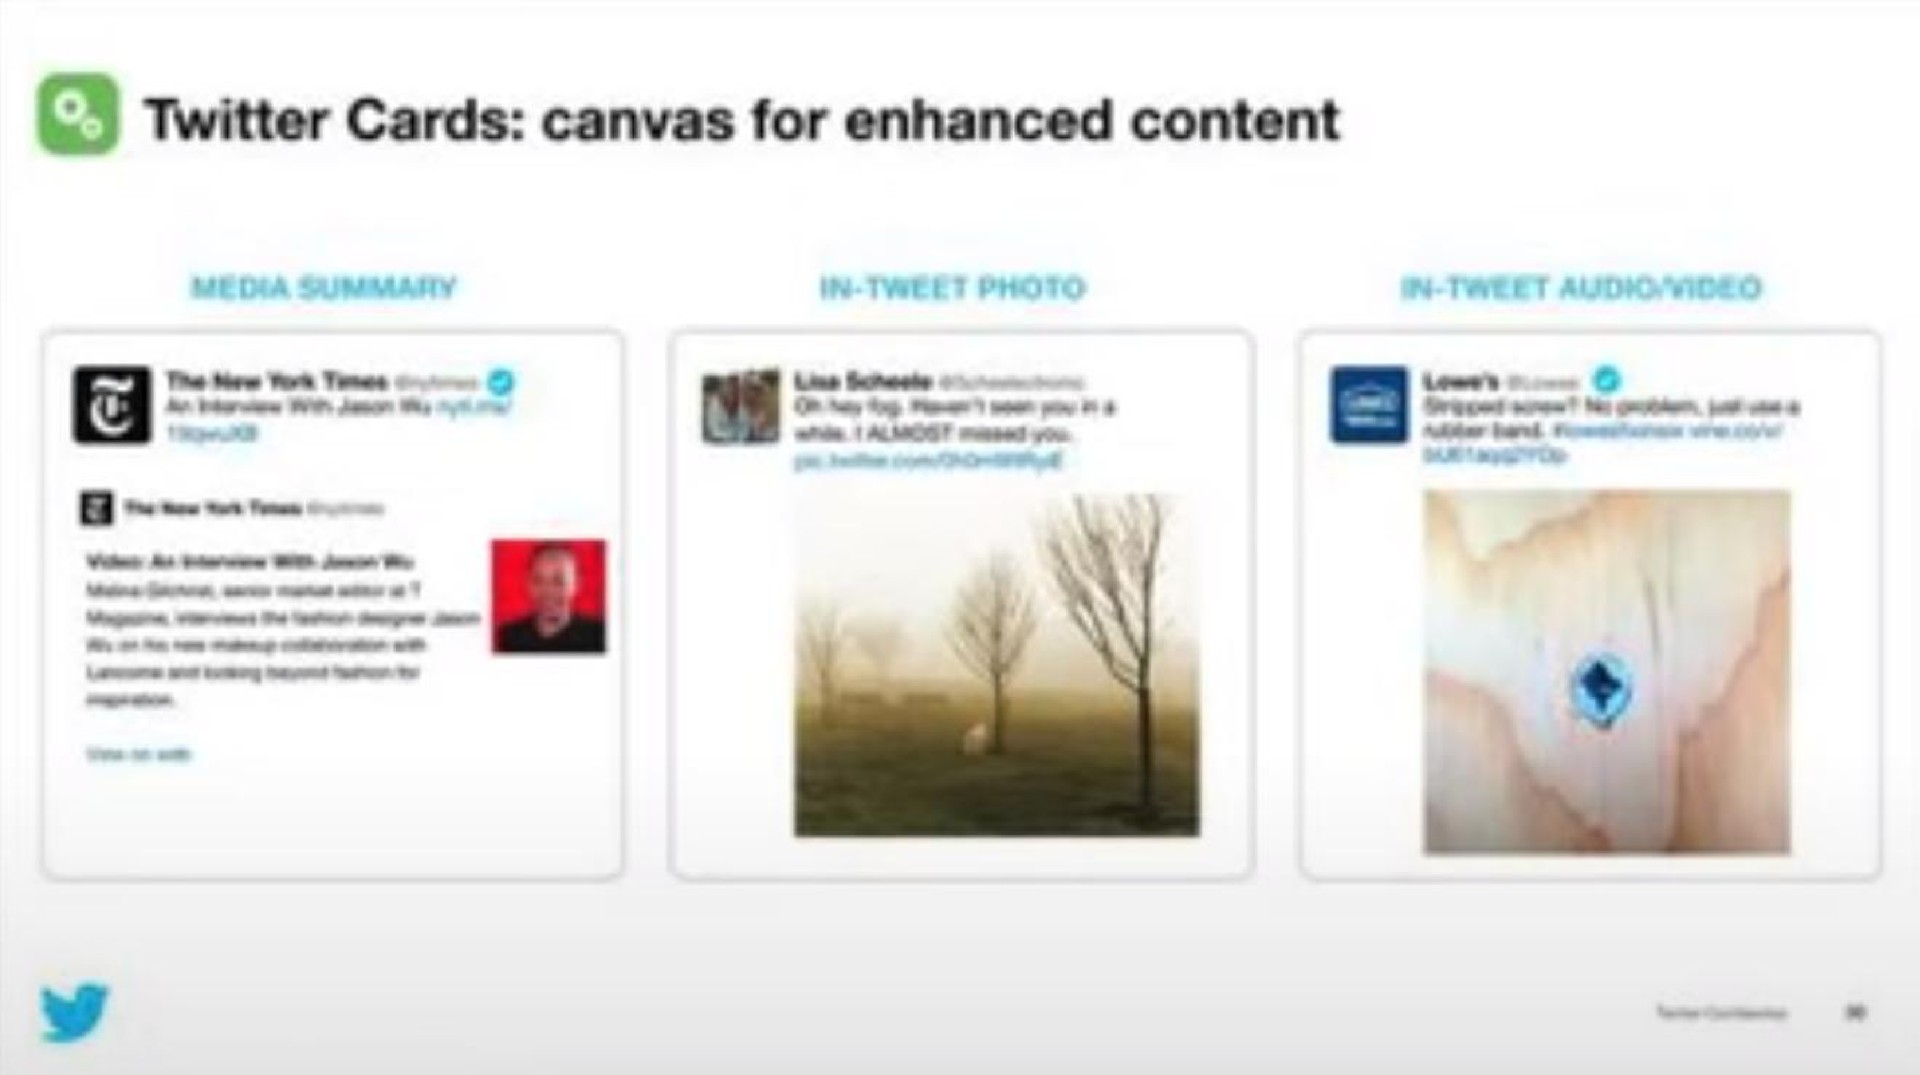 twitter cards canvas for enhanced content | Twitter